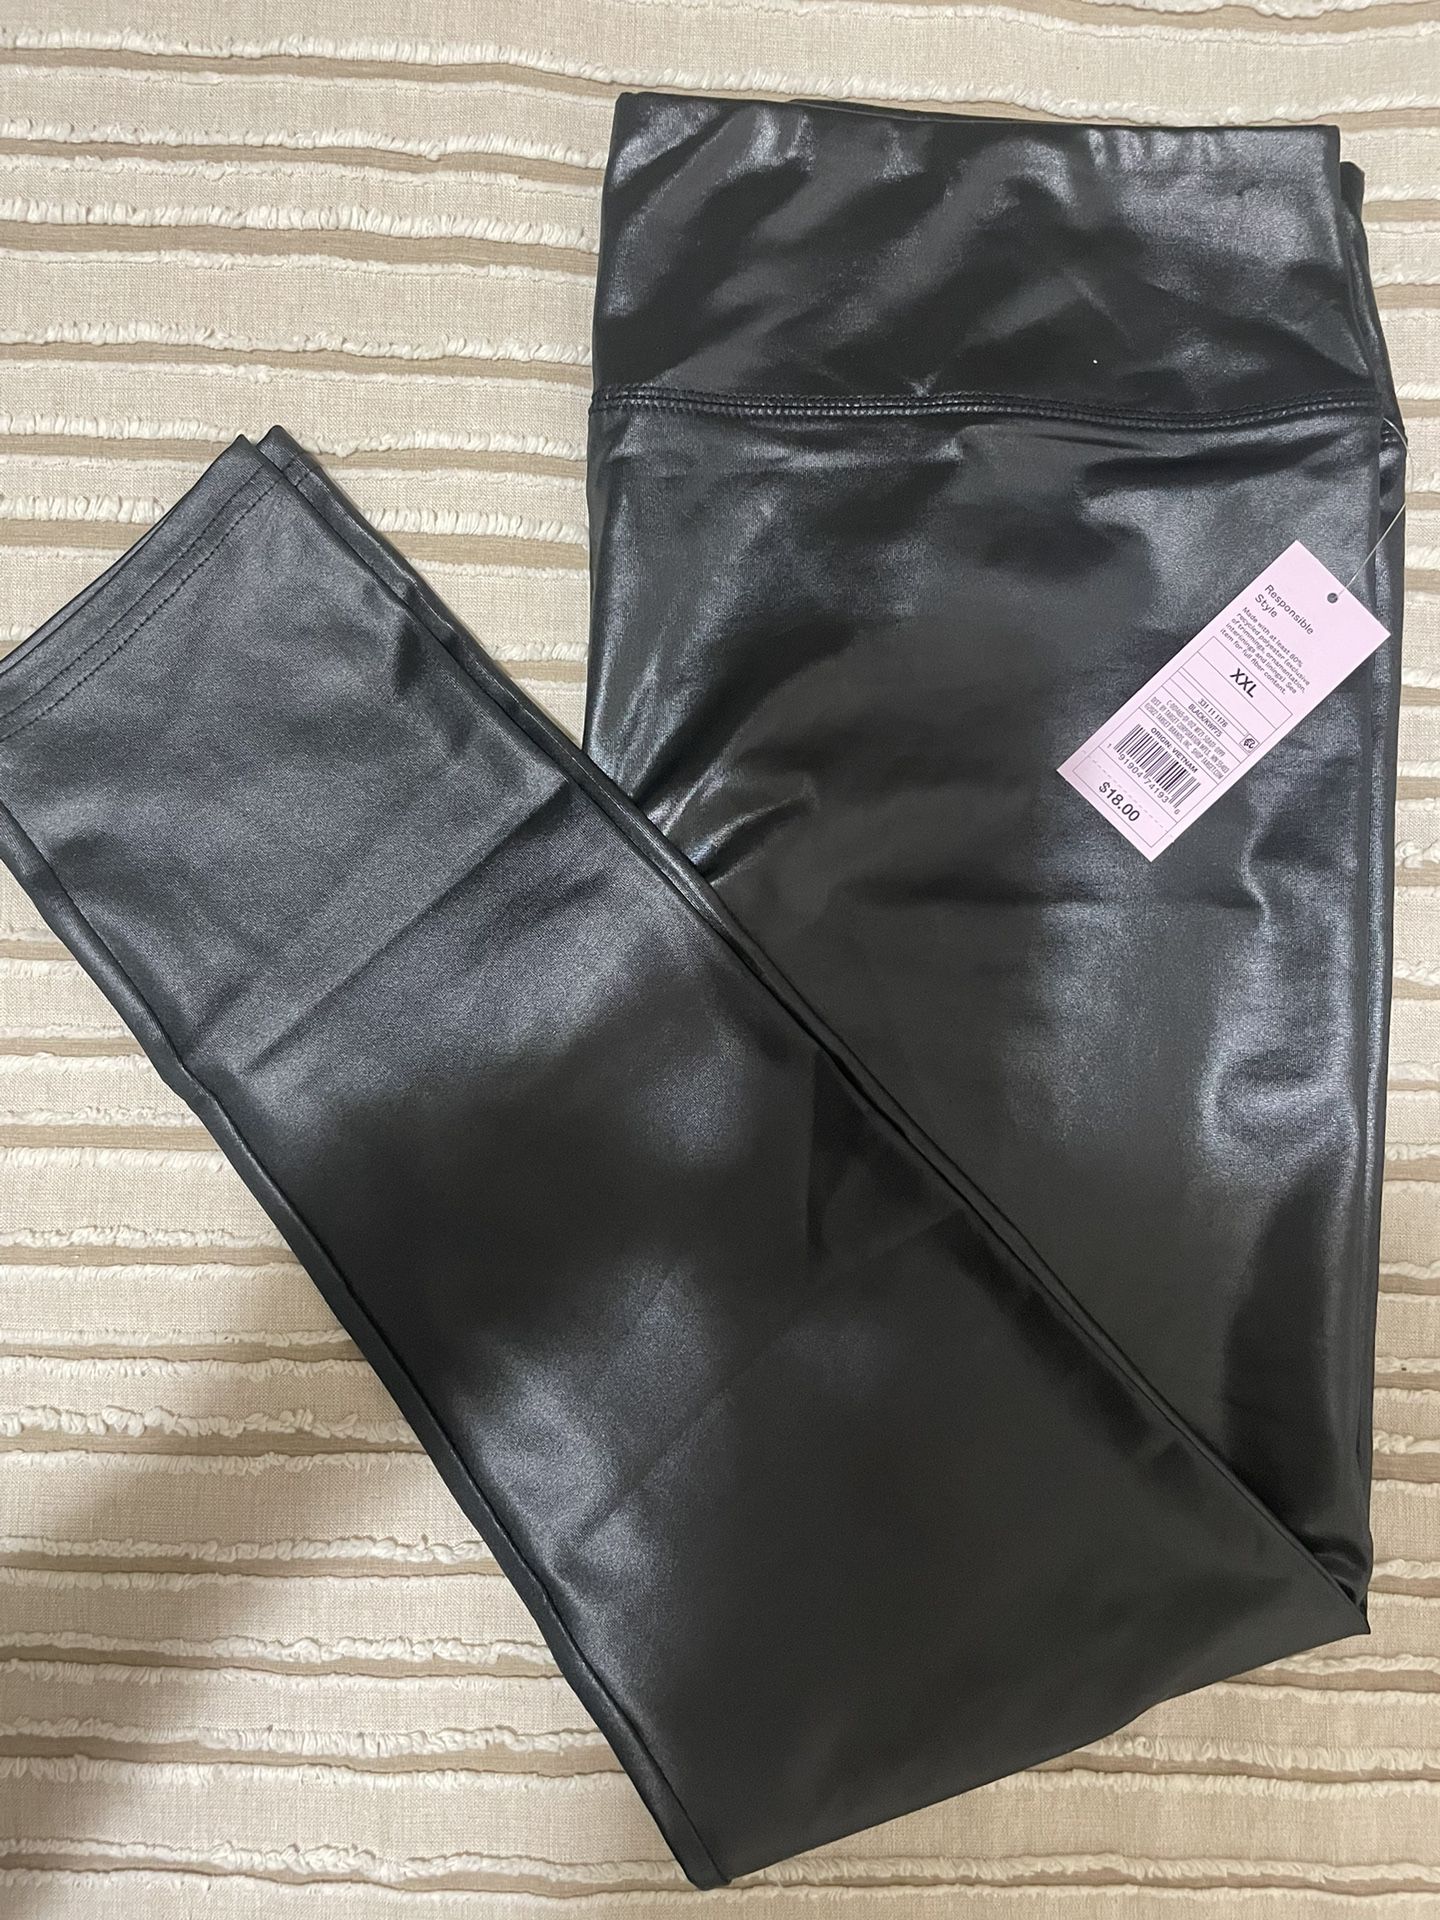 Faux Leather LEGGINGS Brand New XXL